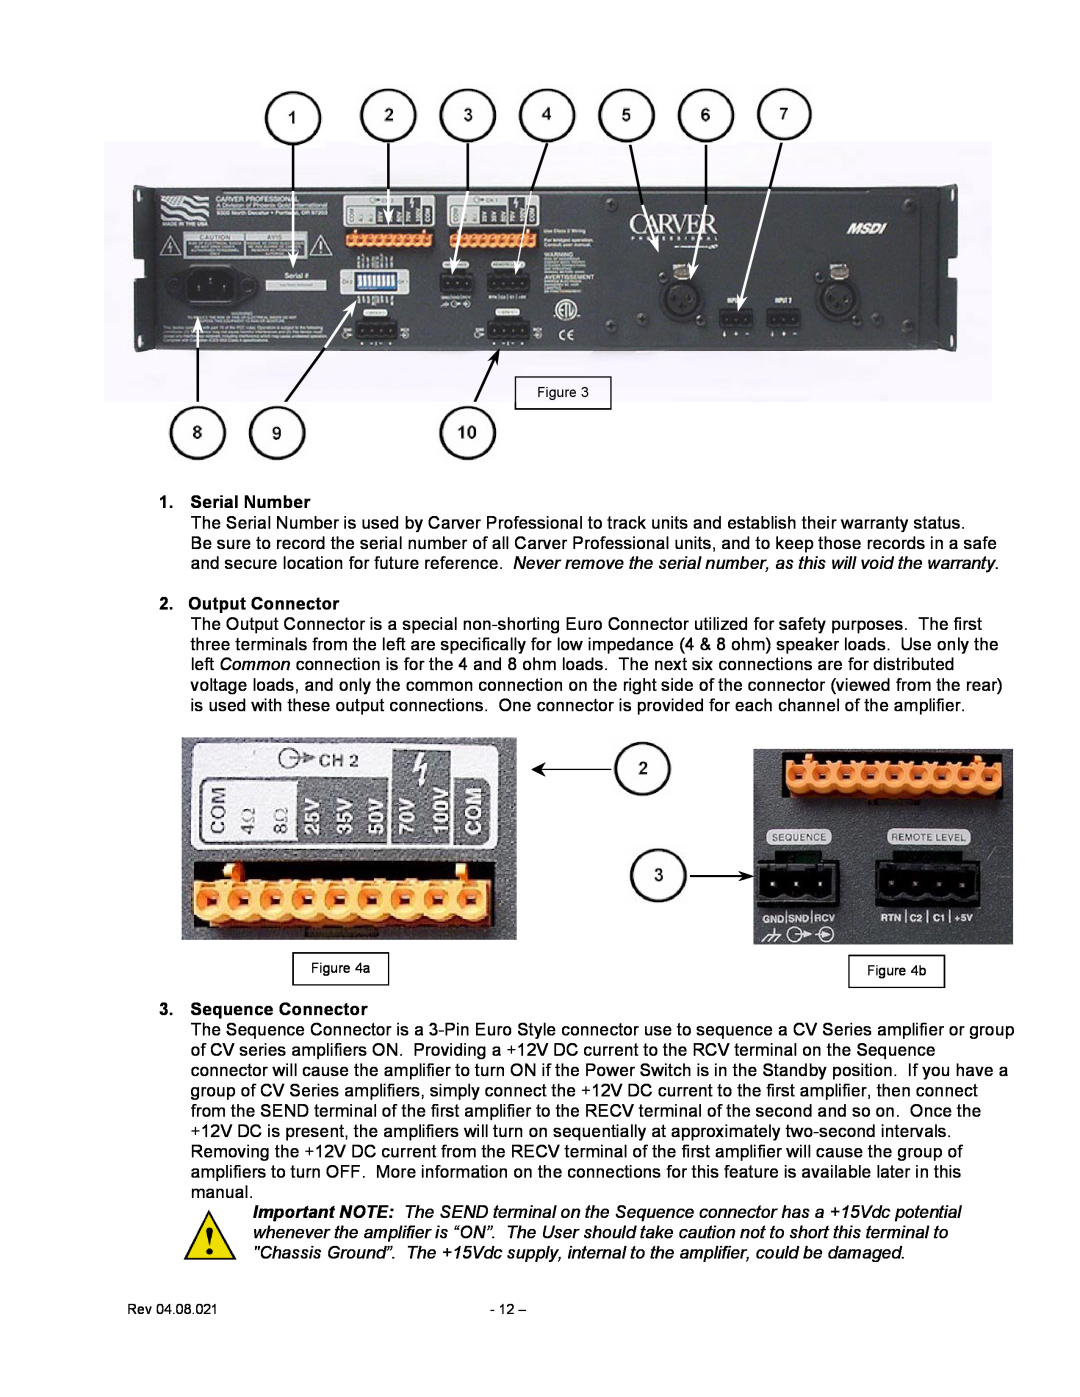 Carver CV Series user manual Serial Number, Output Connector, Sequence Connector 